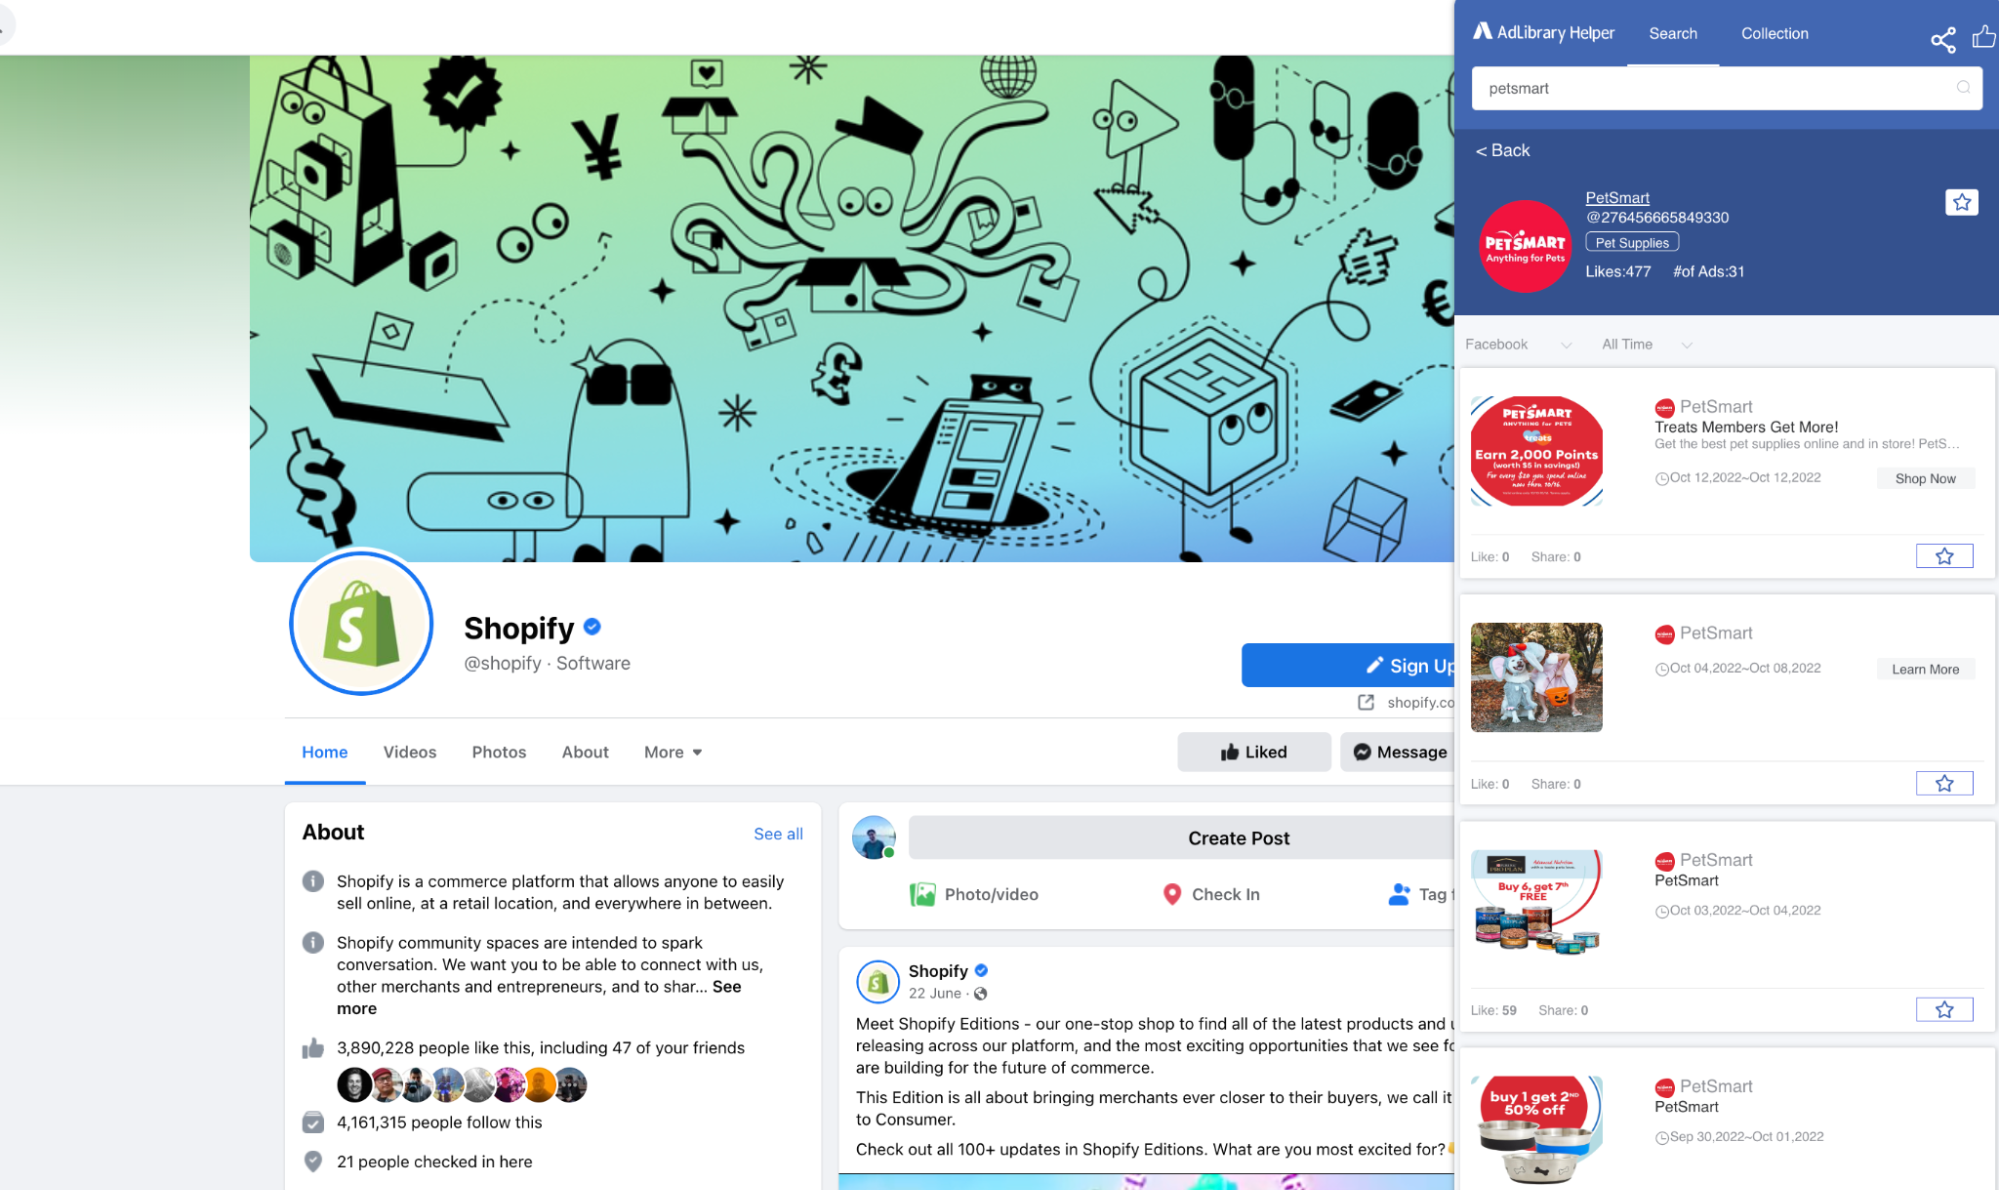 Shopify Facebook page with illustration of digital commerce tools and recent PetSmart ads.